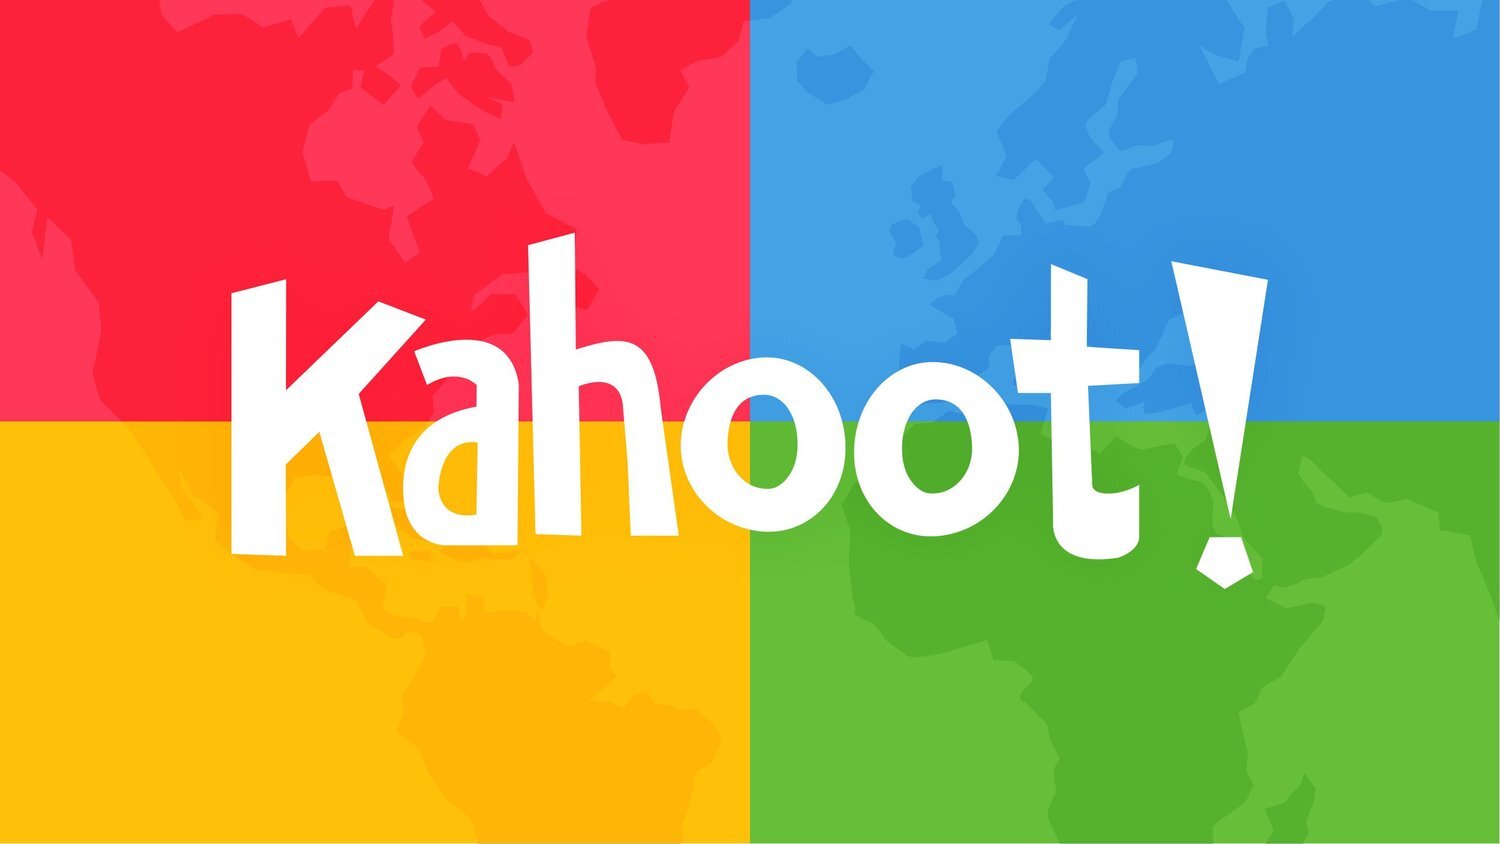 Create kahoots faster and more easily